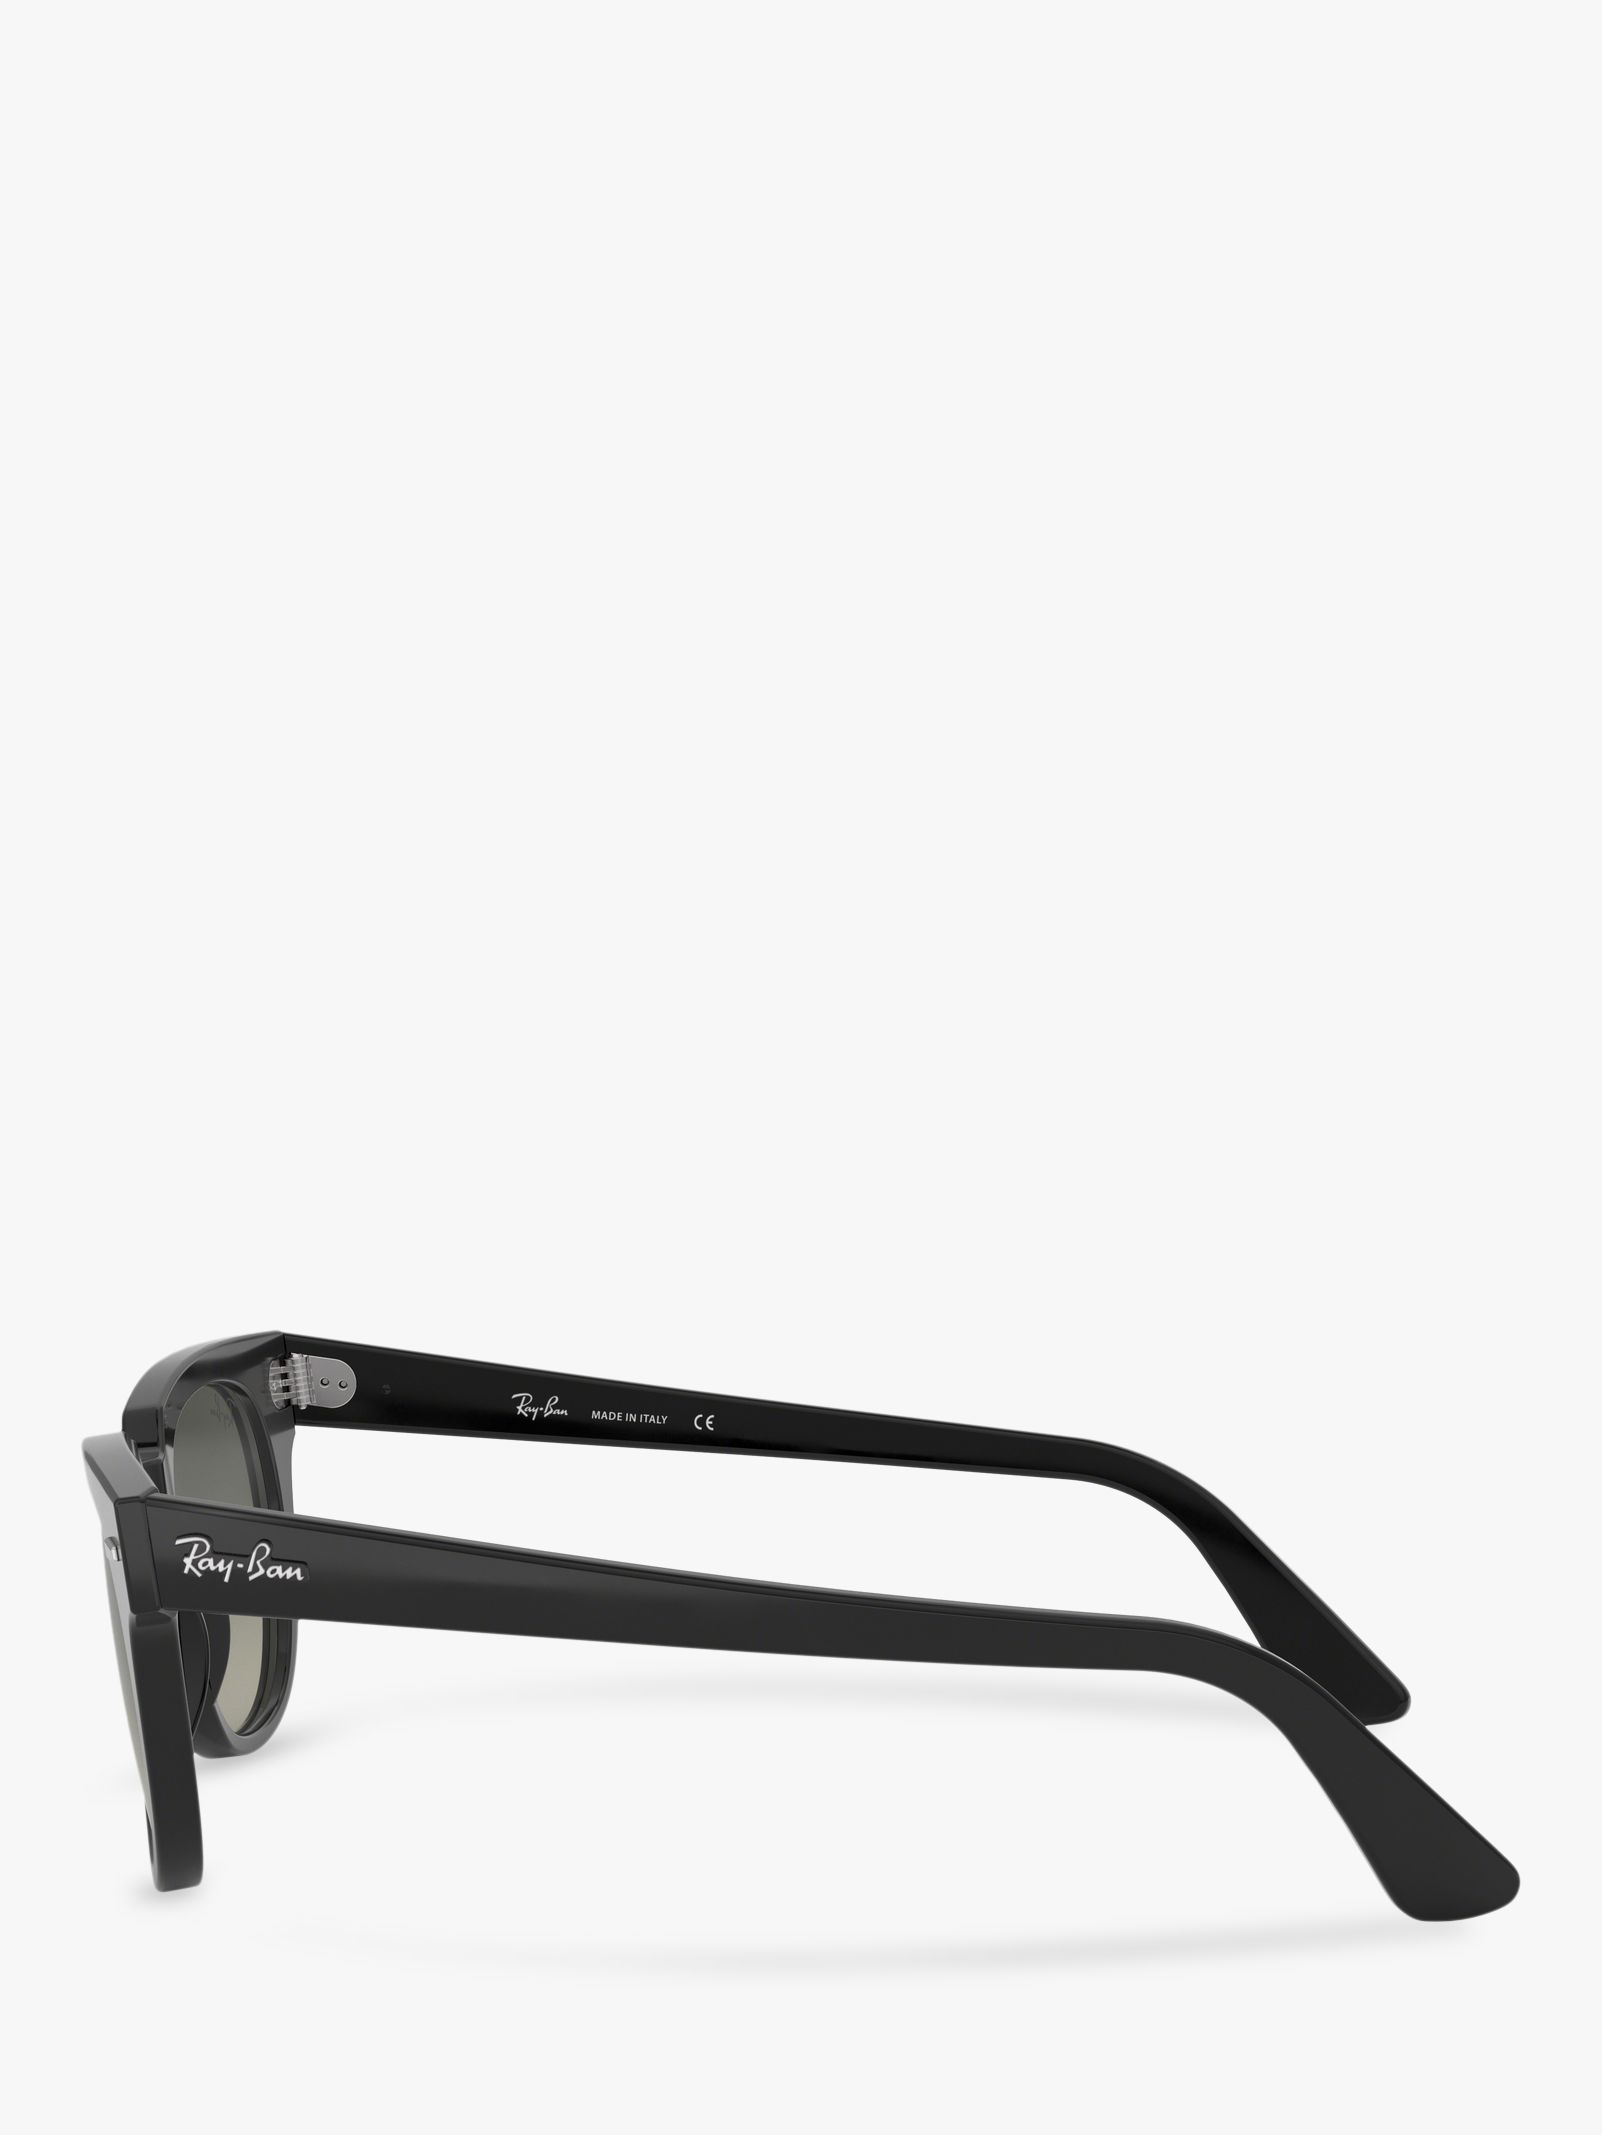 Ray Ban Rb2168 Unisex Square Sunglasses Blackgrey Gradient At John Lewis And Partners 0549